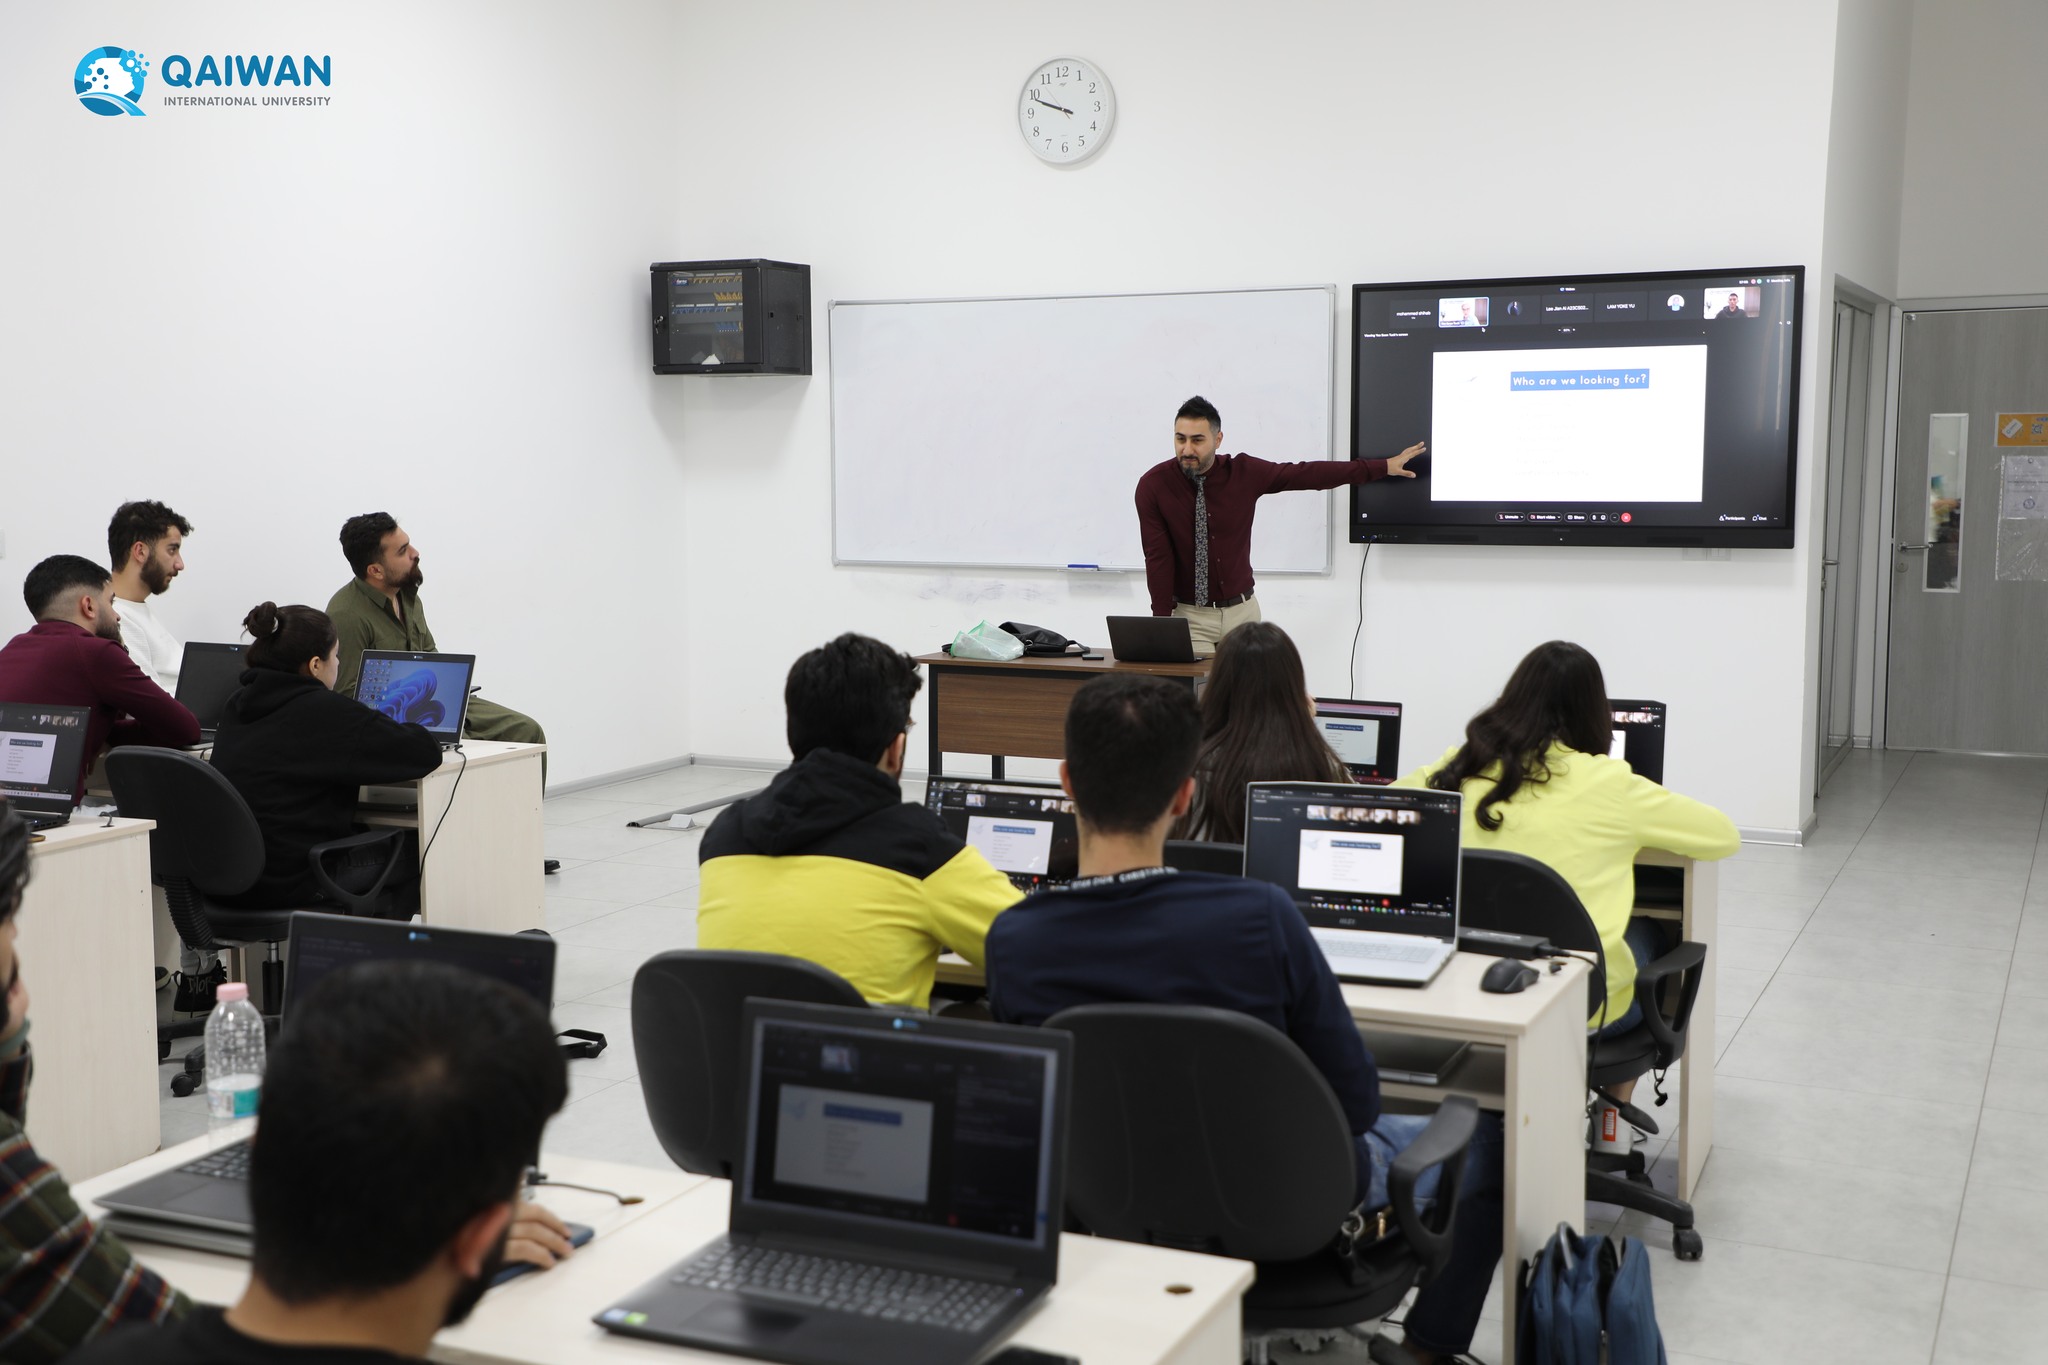 Department of Software Engineering hosted an webinar facilitated by UTM at QIU